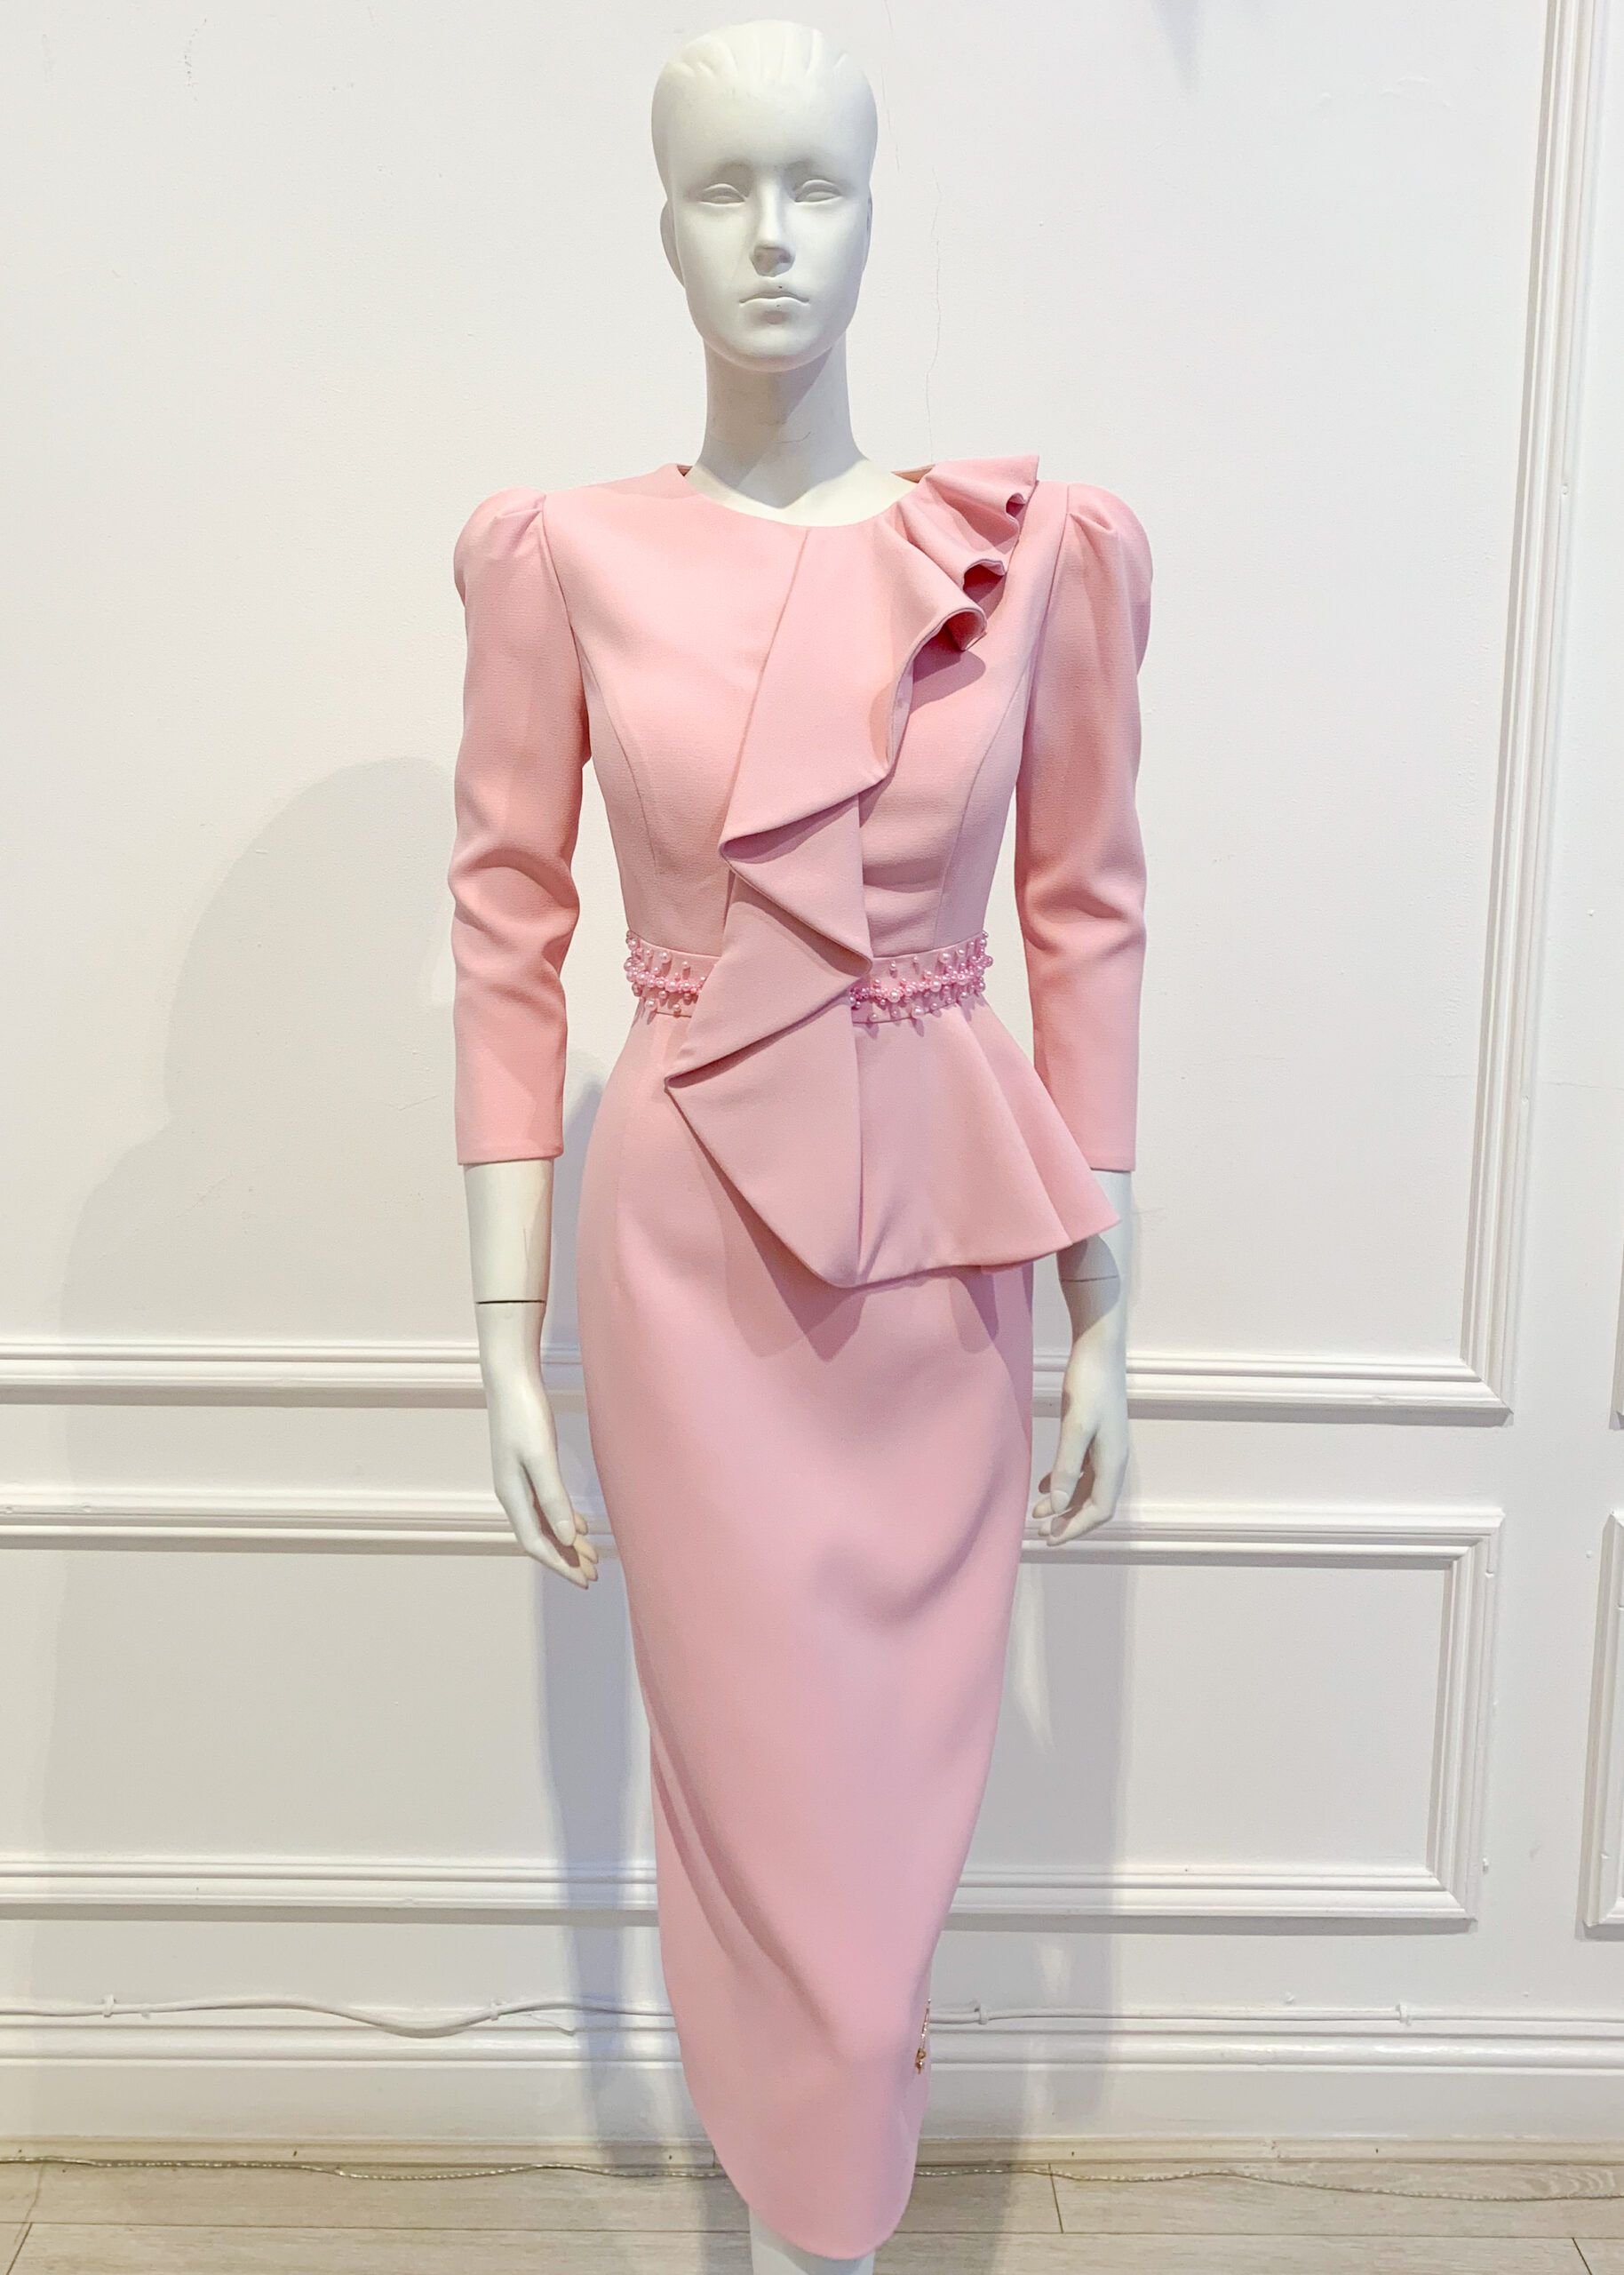 Pale pink ruffle half-peplum pencil dress with pink pearl waistband and small puff shoulder